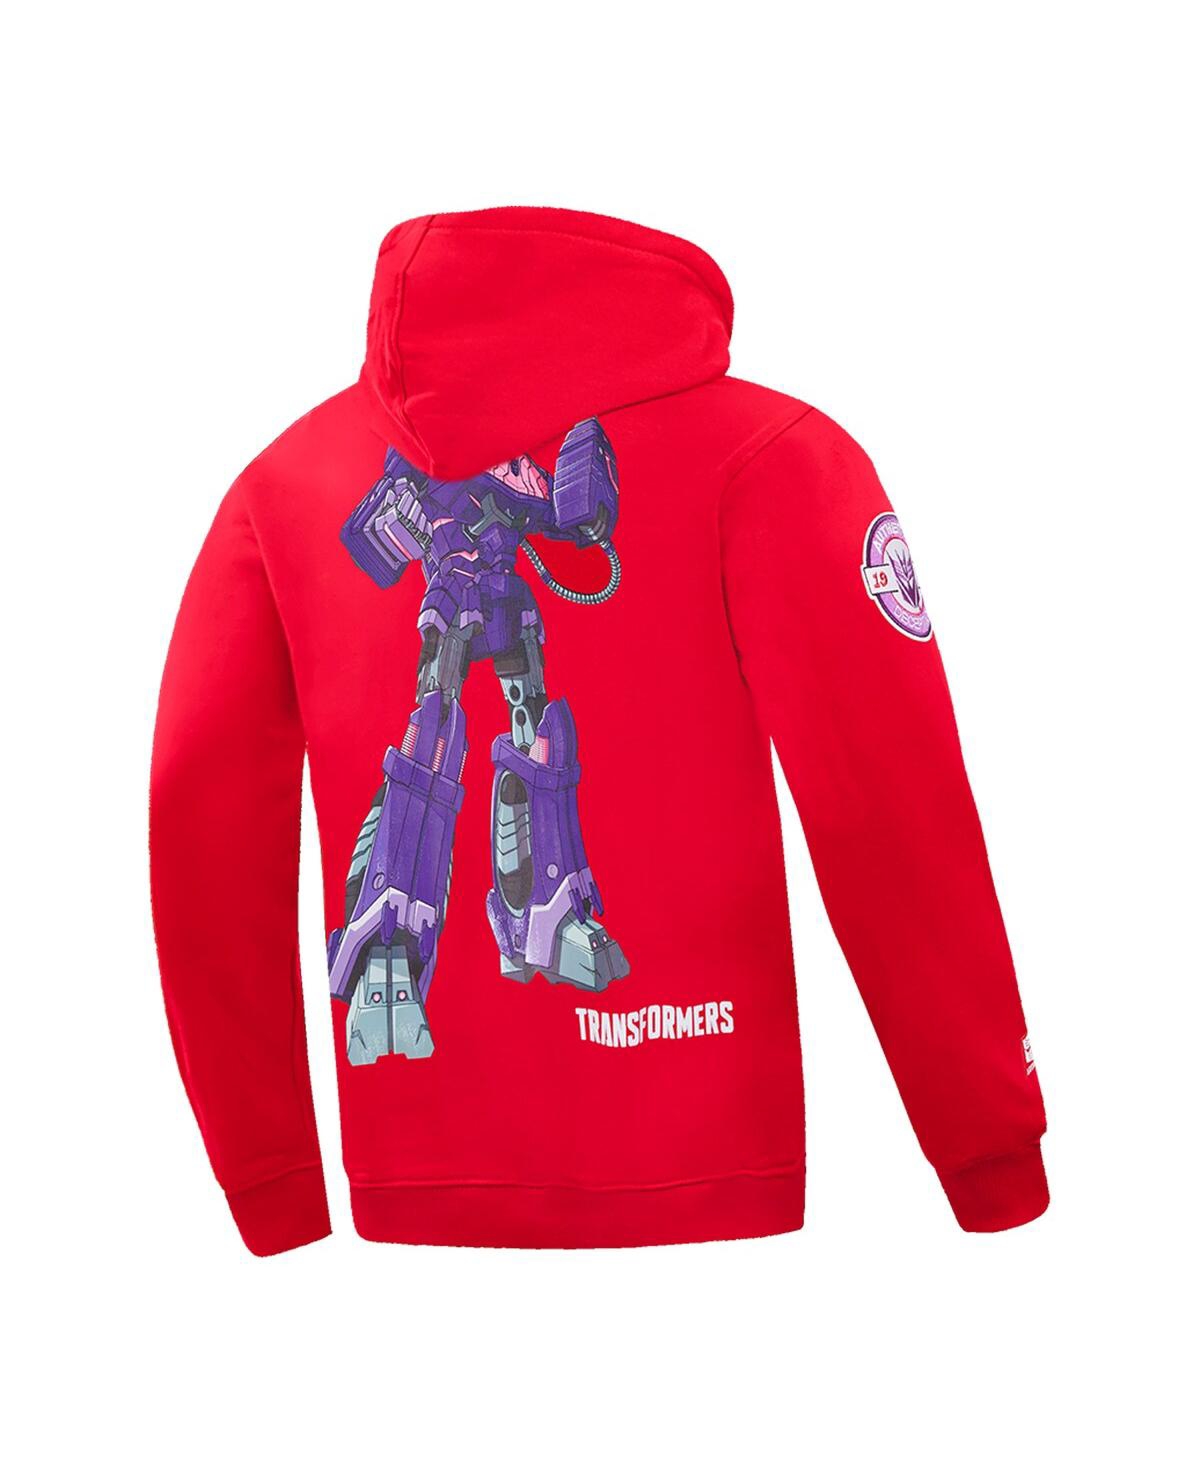 Shop Freeze Max Men's And Women's  Red Transformers Made On Cybertron Pullover Hoodie